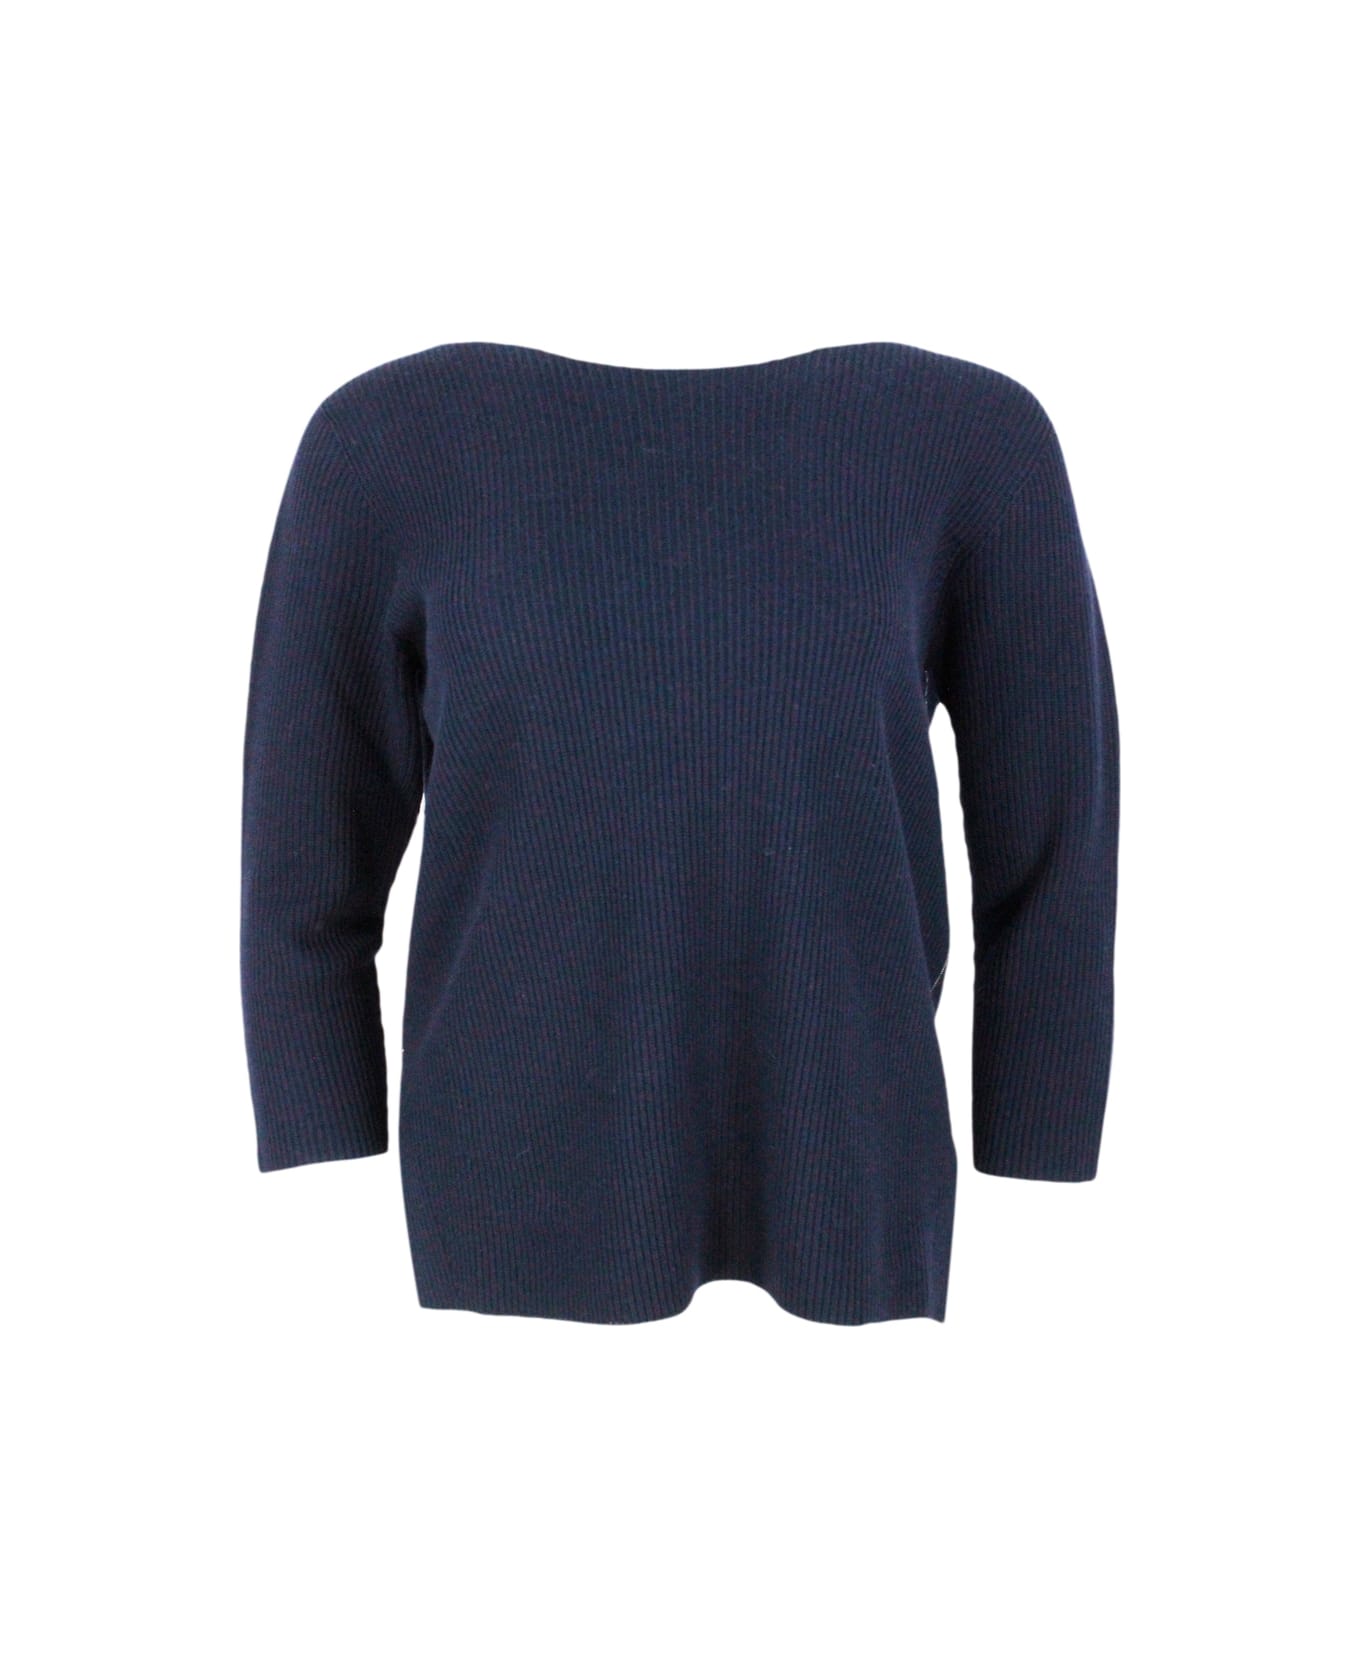 Fabiana Filippi Long-sleeved Boat-neck Sweater In Wool And Cotton Embellished With Brilliant Monili On The Neck - Blu